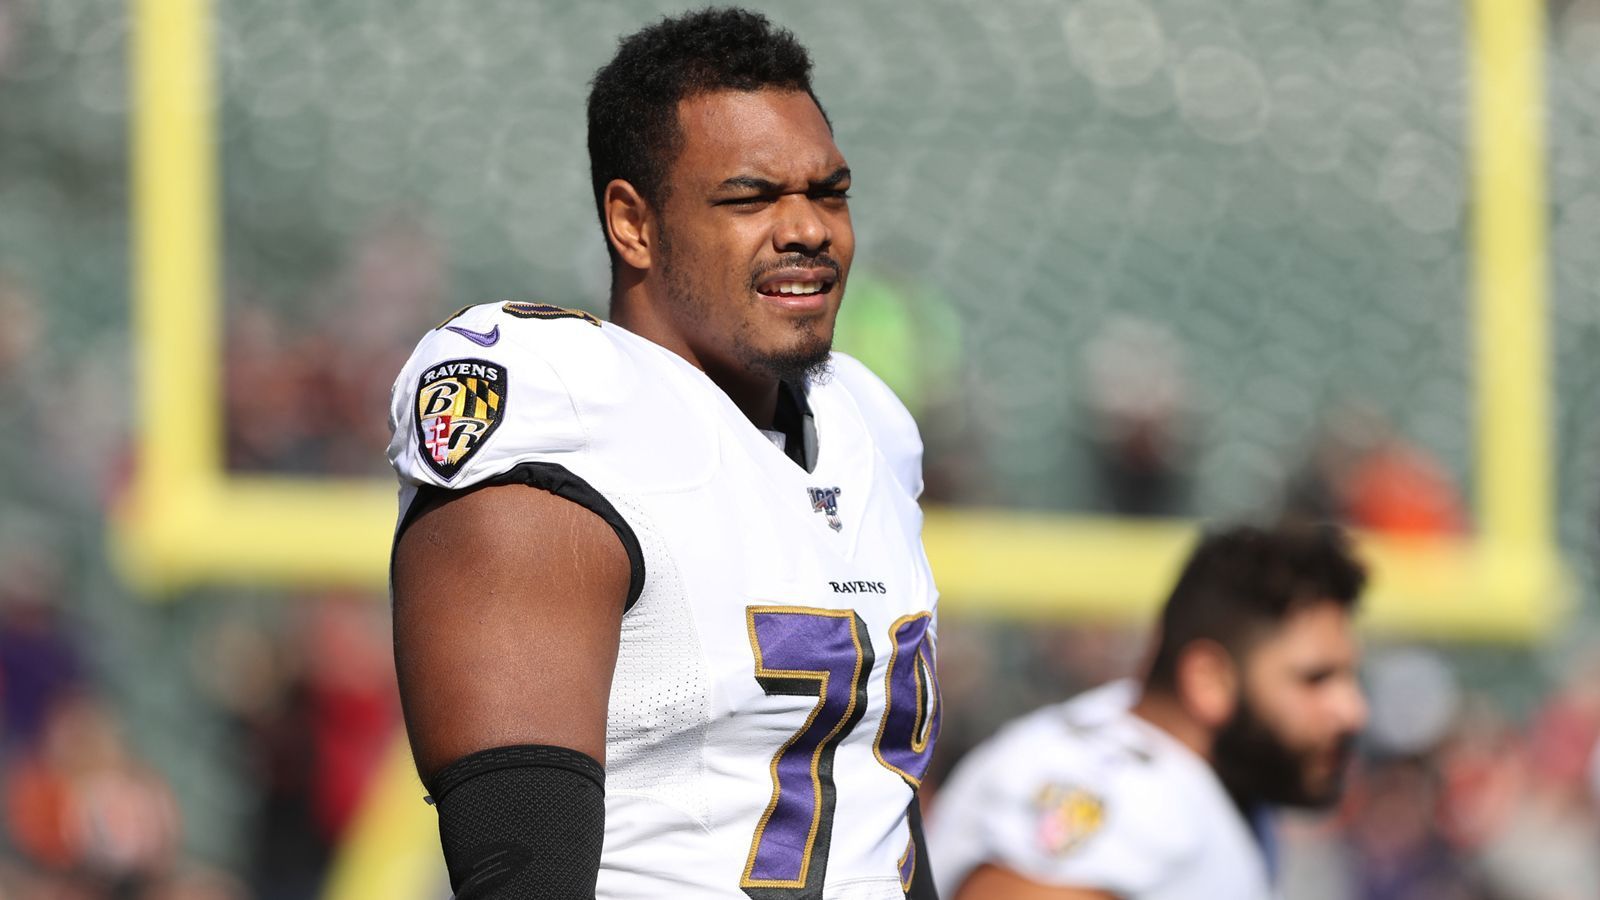 
                <strong>5. Ronnie Stanley (Baltimore Ravens)</strong><br>
                Total Cash: 30.866.000 Dollar -Vertragslaufzeit: 2026 -Position: Offensive Tackle -Alter: 26
              